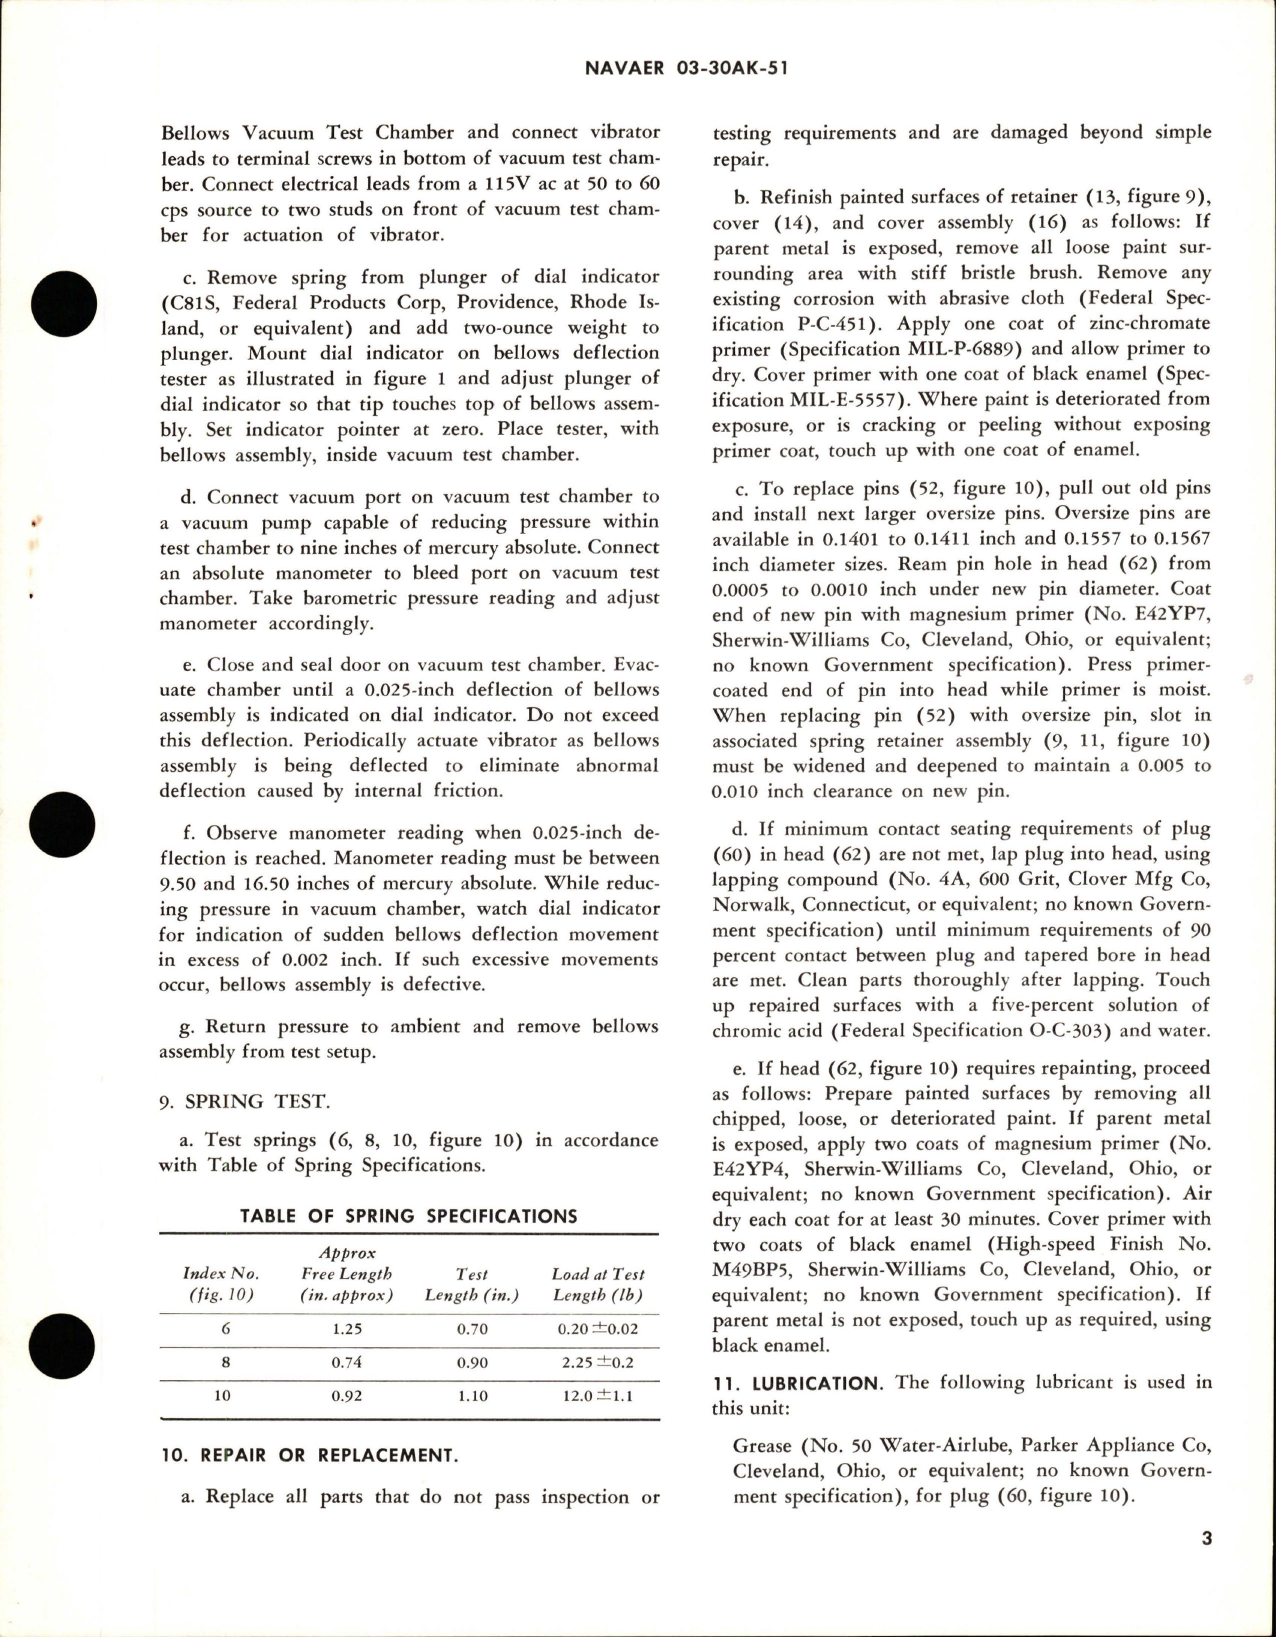 Sample page 5 from AirCorps Library document: Overhaul Instructions with Parts Breakdown for Cabin Air Pressure Outflow Valve Control - Part 102020-1 - Model OVC1-2-1 